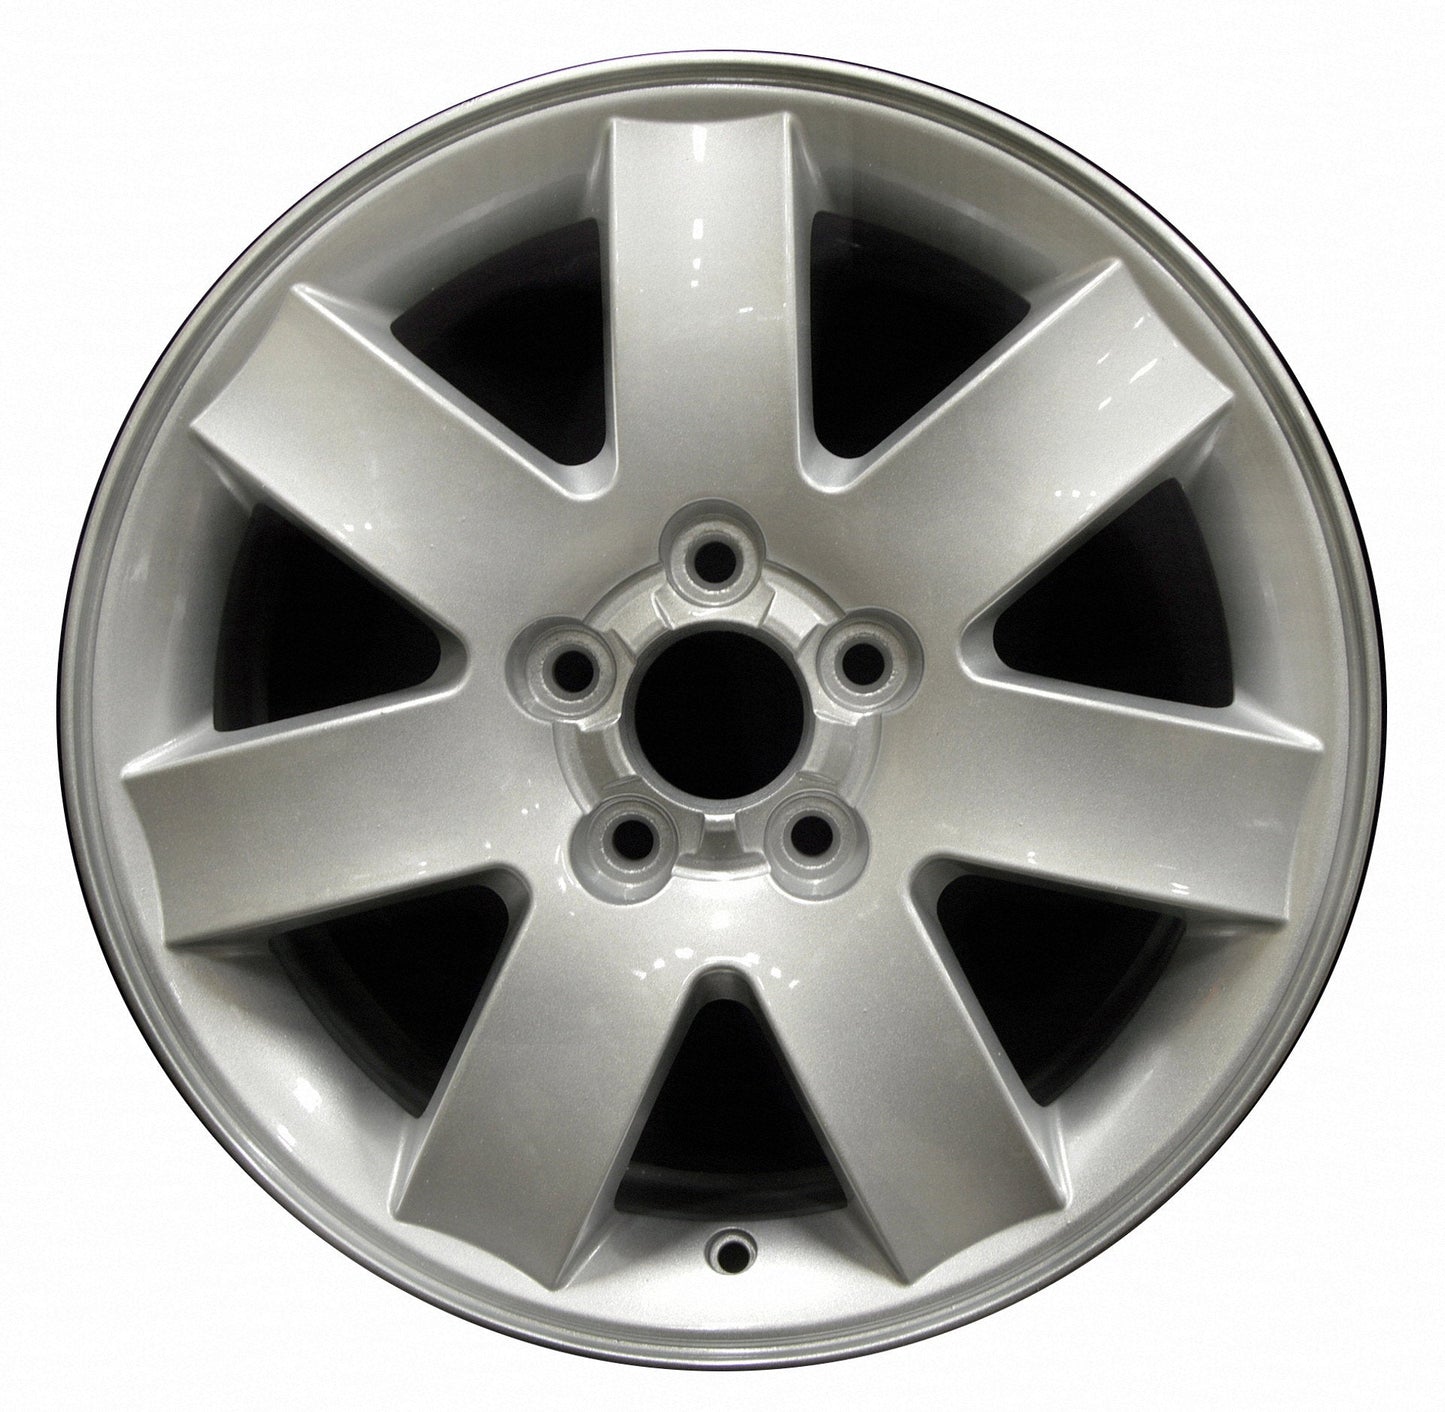 Ford Five Hundred  2005, 2006, 2007 Factory OEM Car Wheel Size 17x7 Alloy WAO.3580.PS02.FF